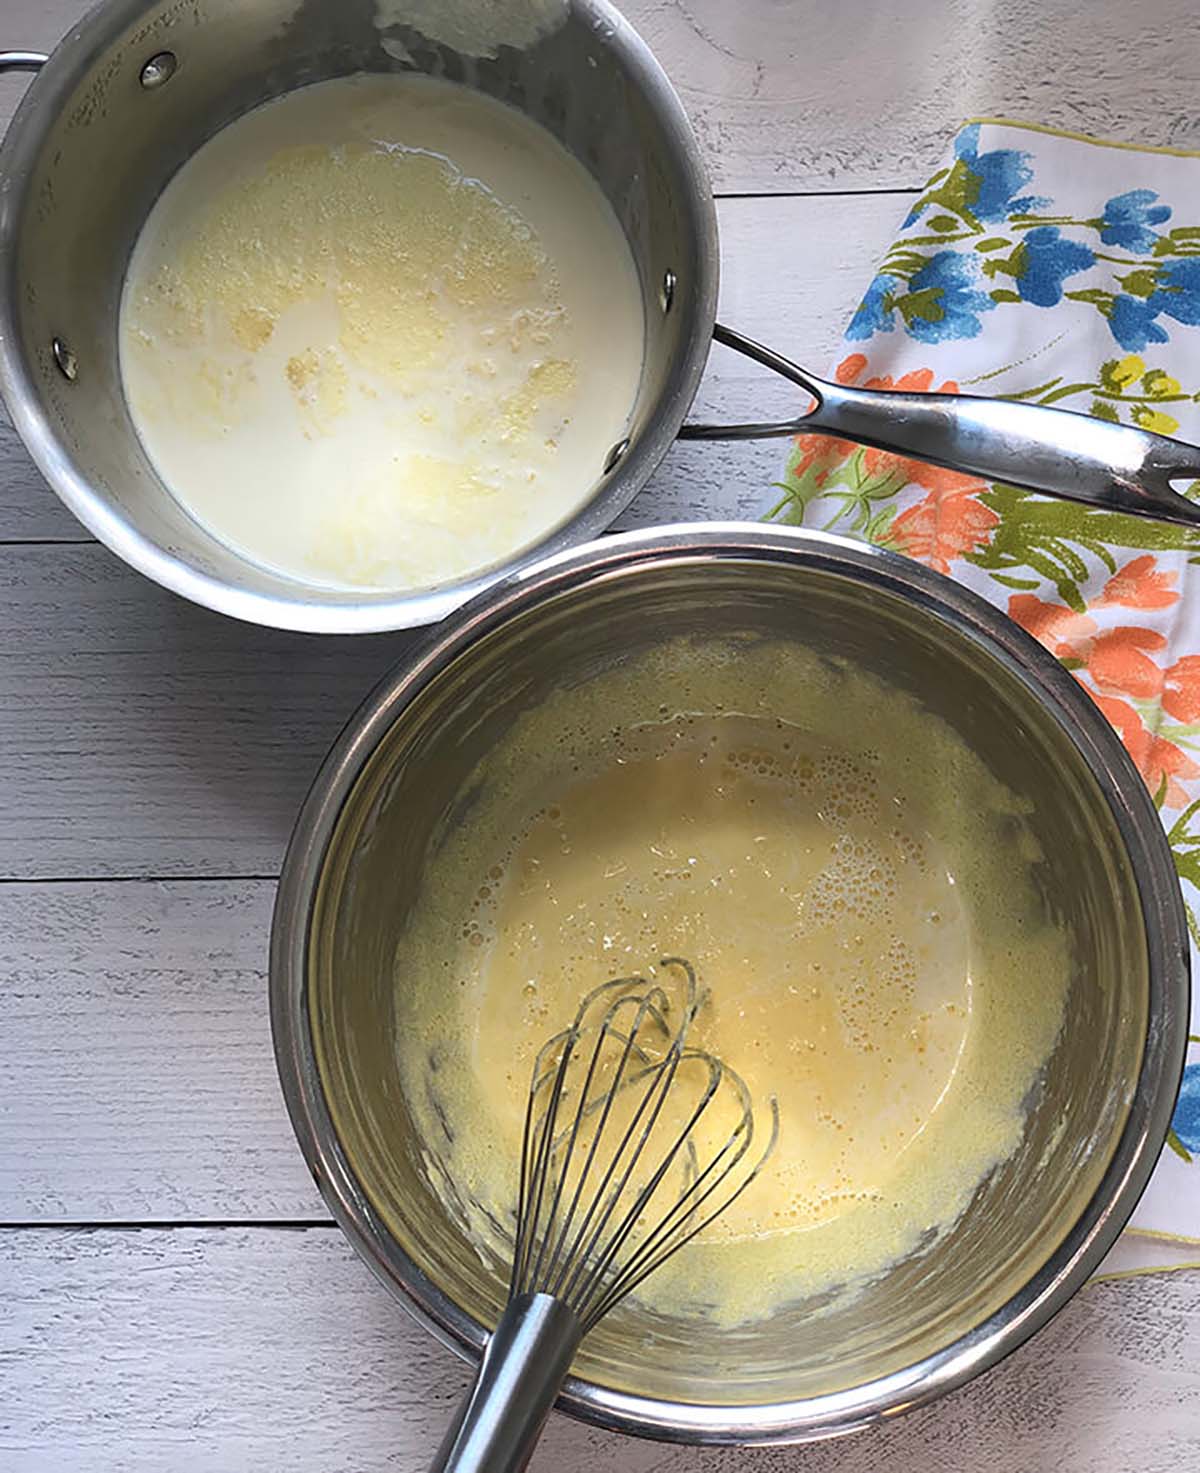 Two metal bowls on a wooden surface, one with whisked eggs and the other with milk, beside a floral cloth and a whisk.